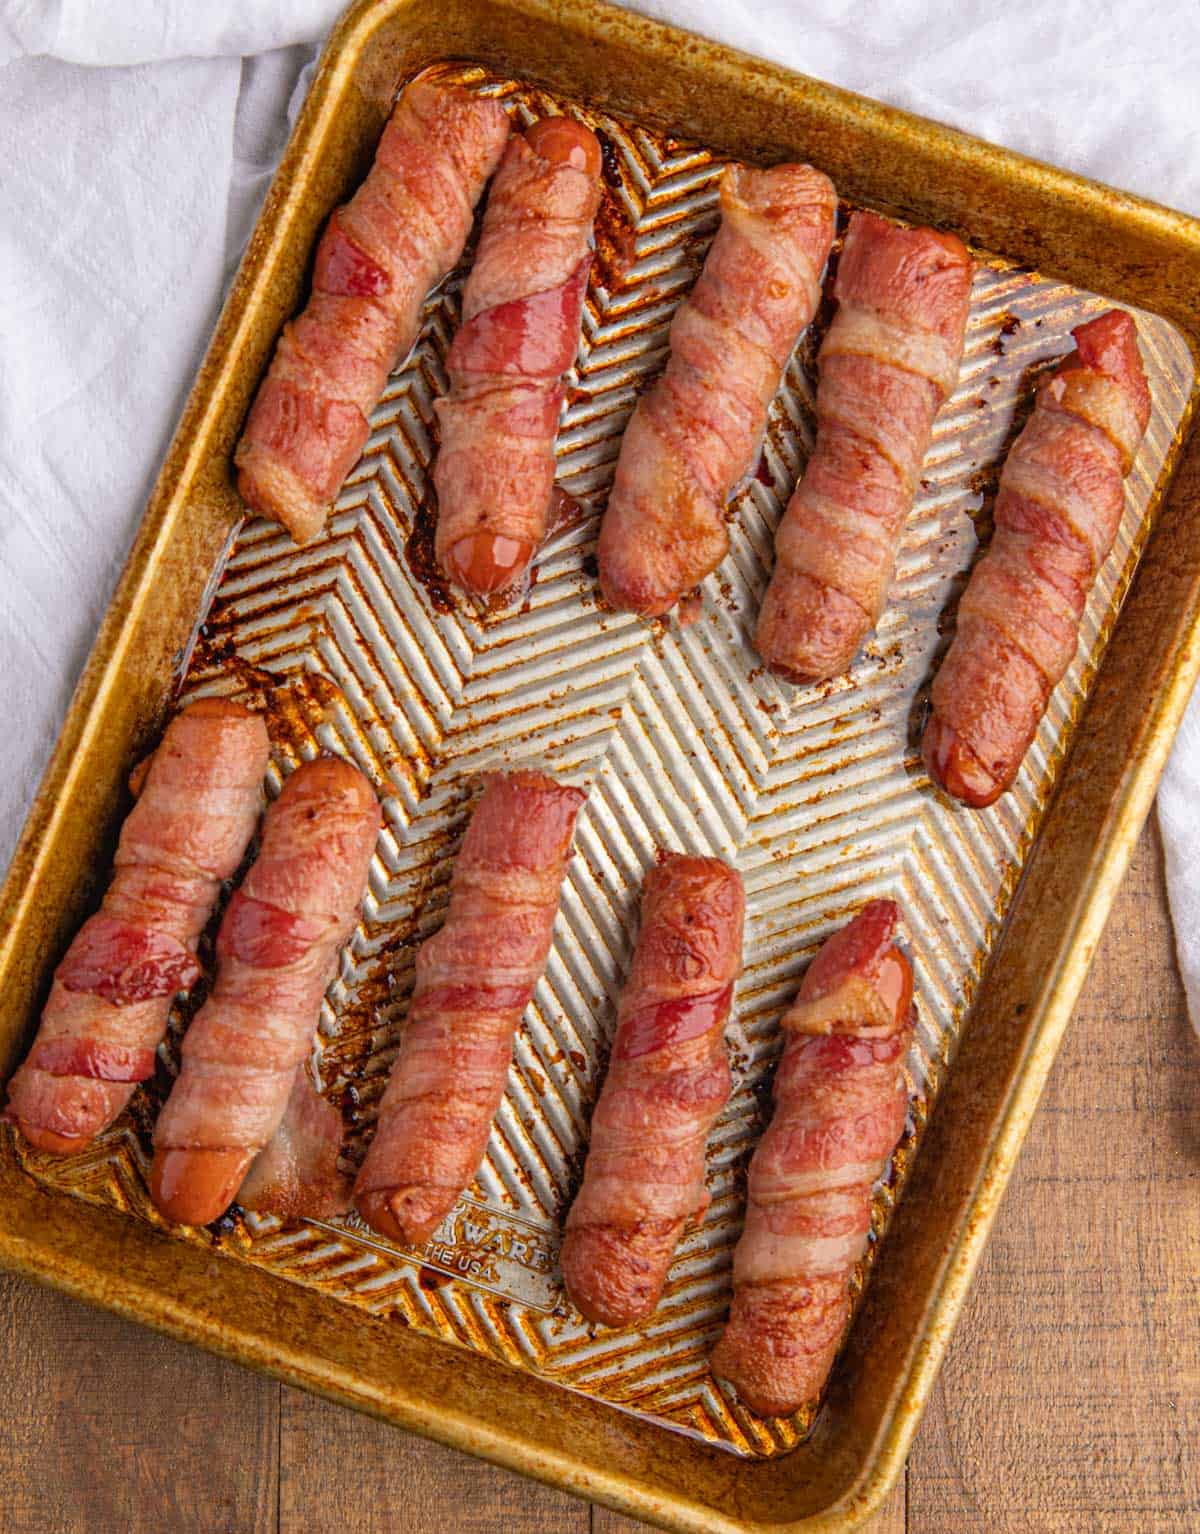 Bacon Wrapped Hot Dogs on Tray